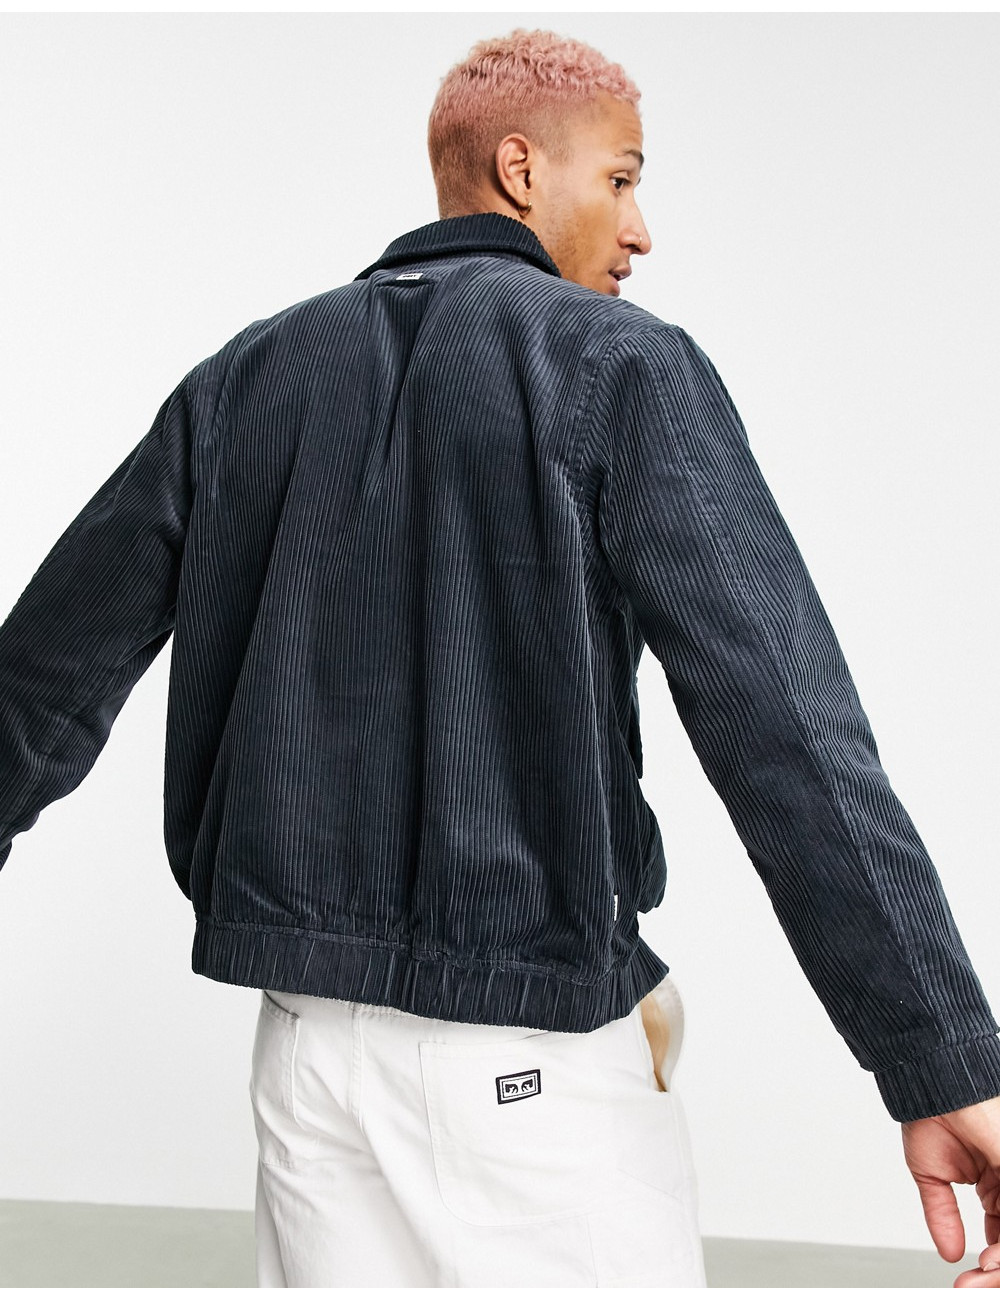 Obey captain cord jacket in...